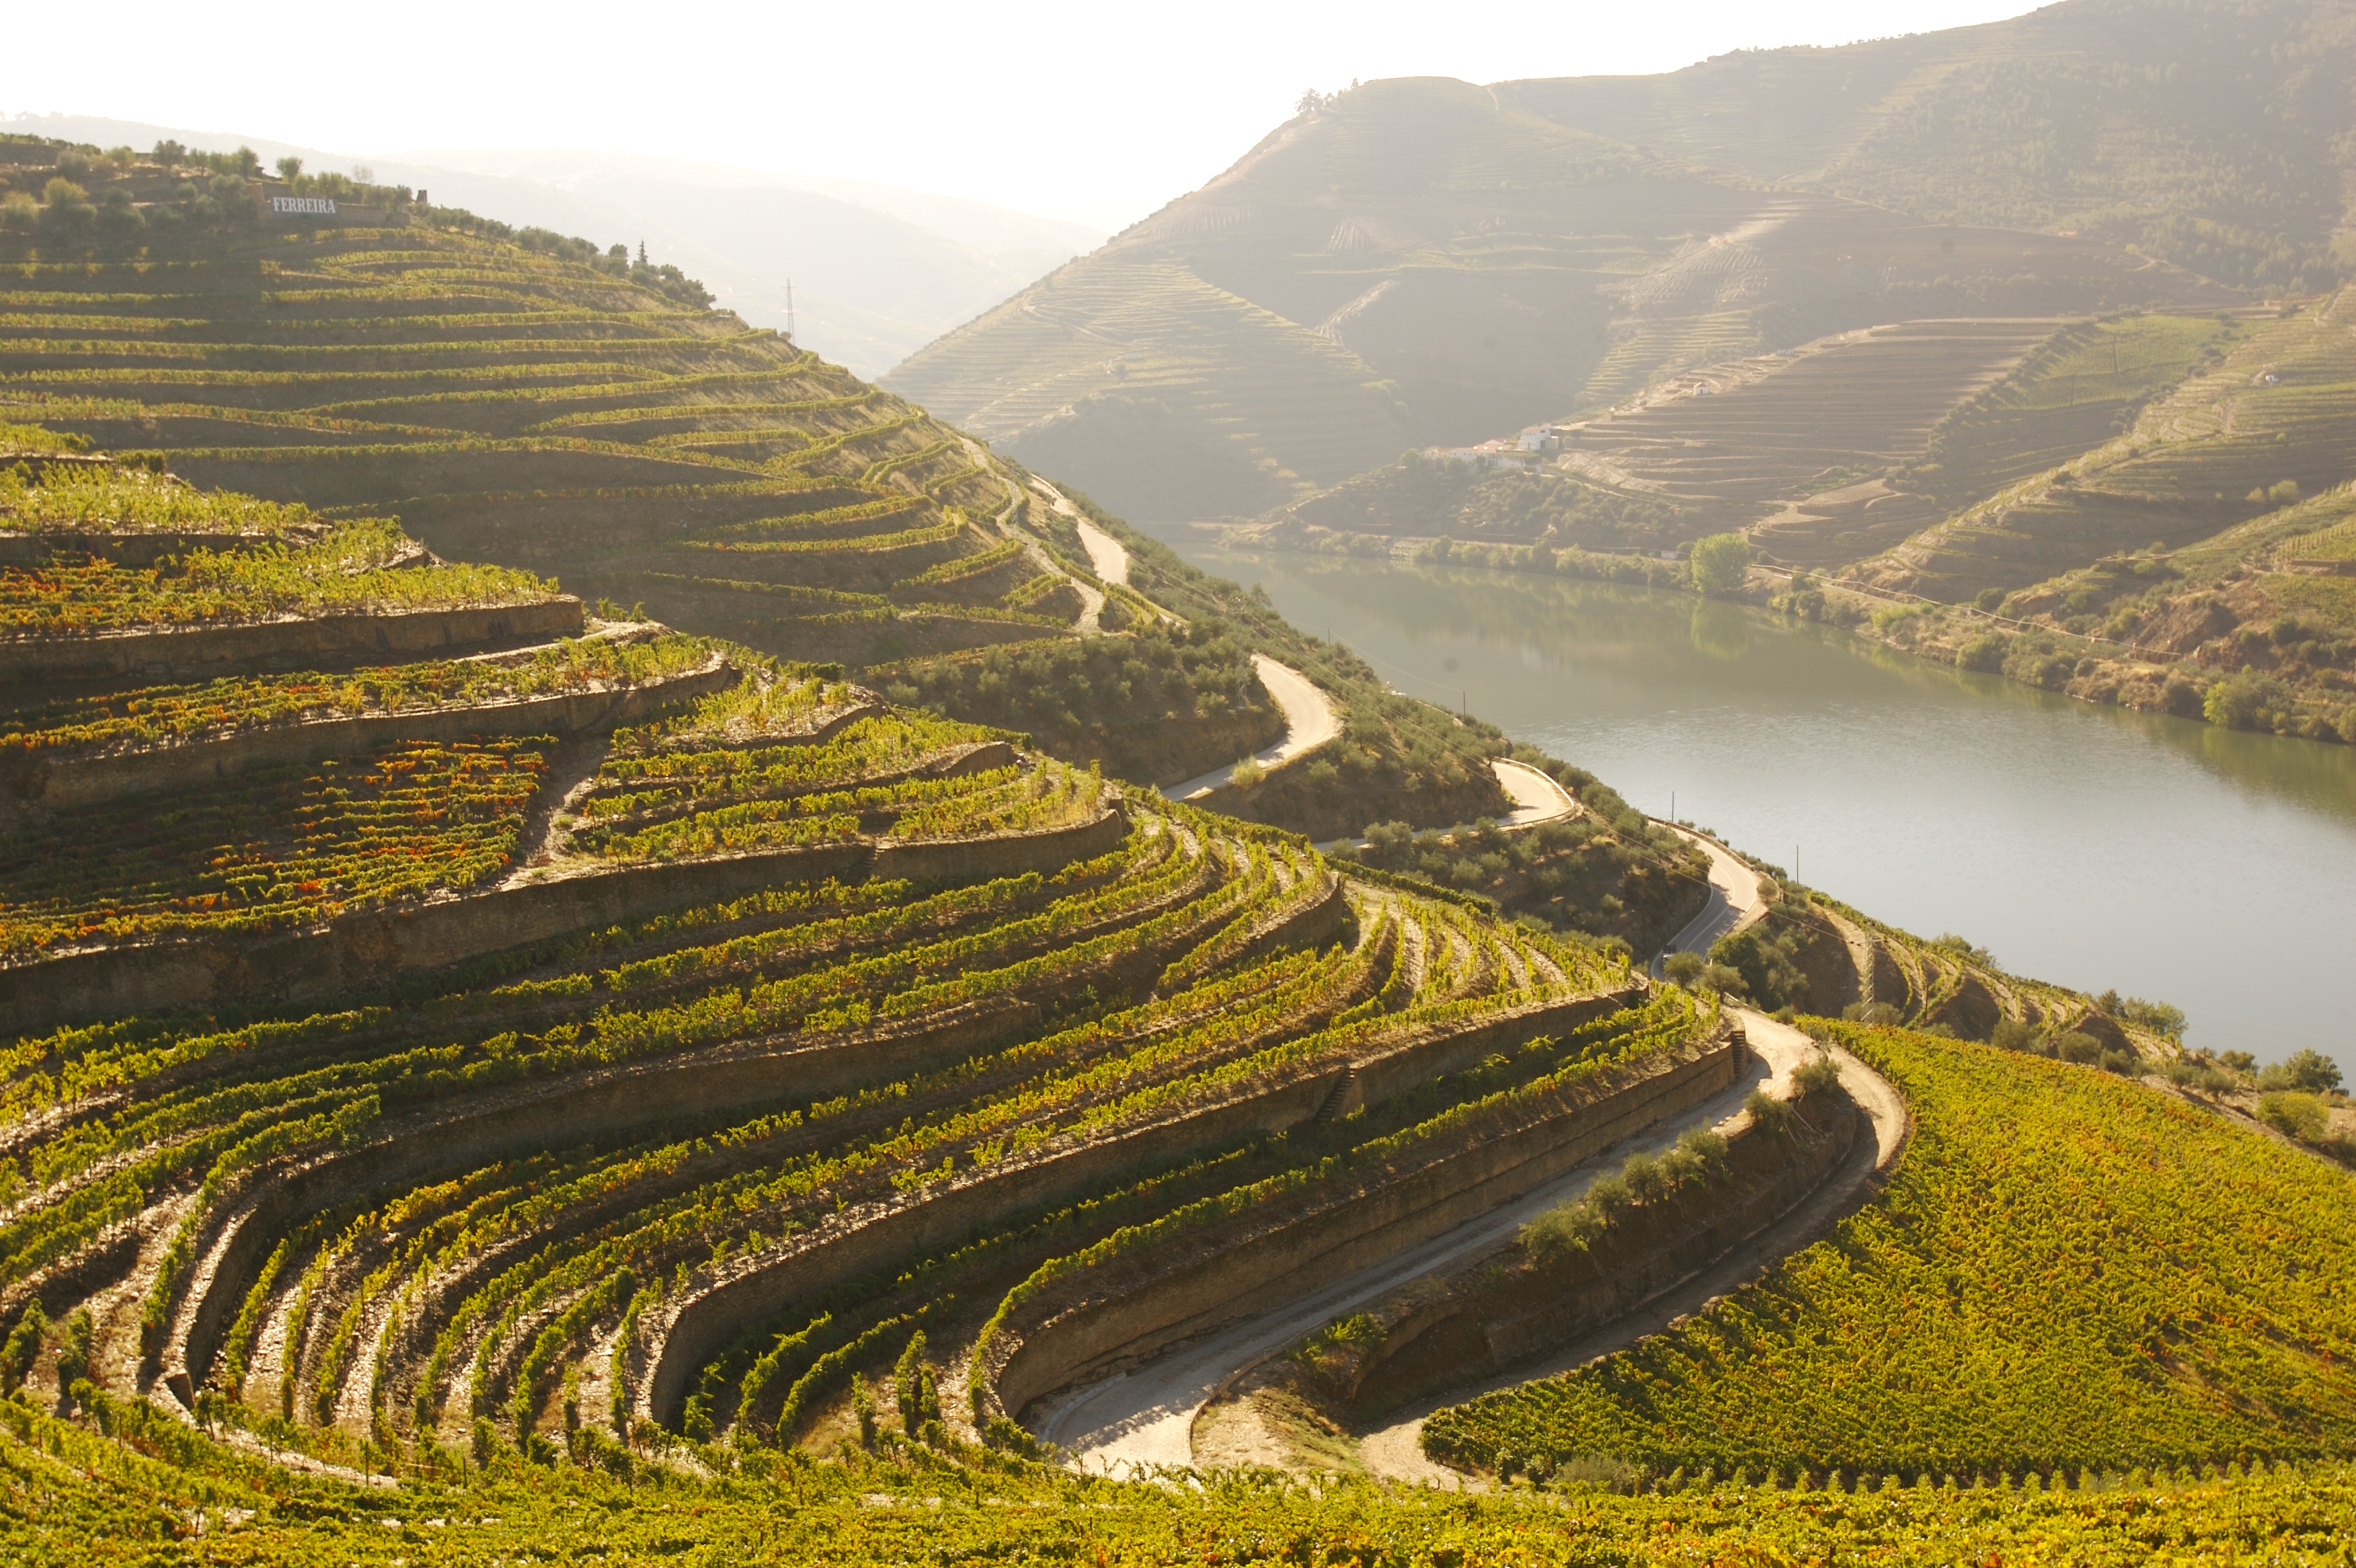 The cultural landscape of the Douro Valley was classified World Heritage in 2001.